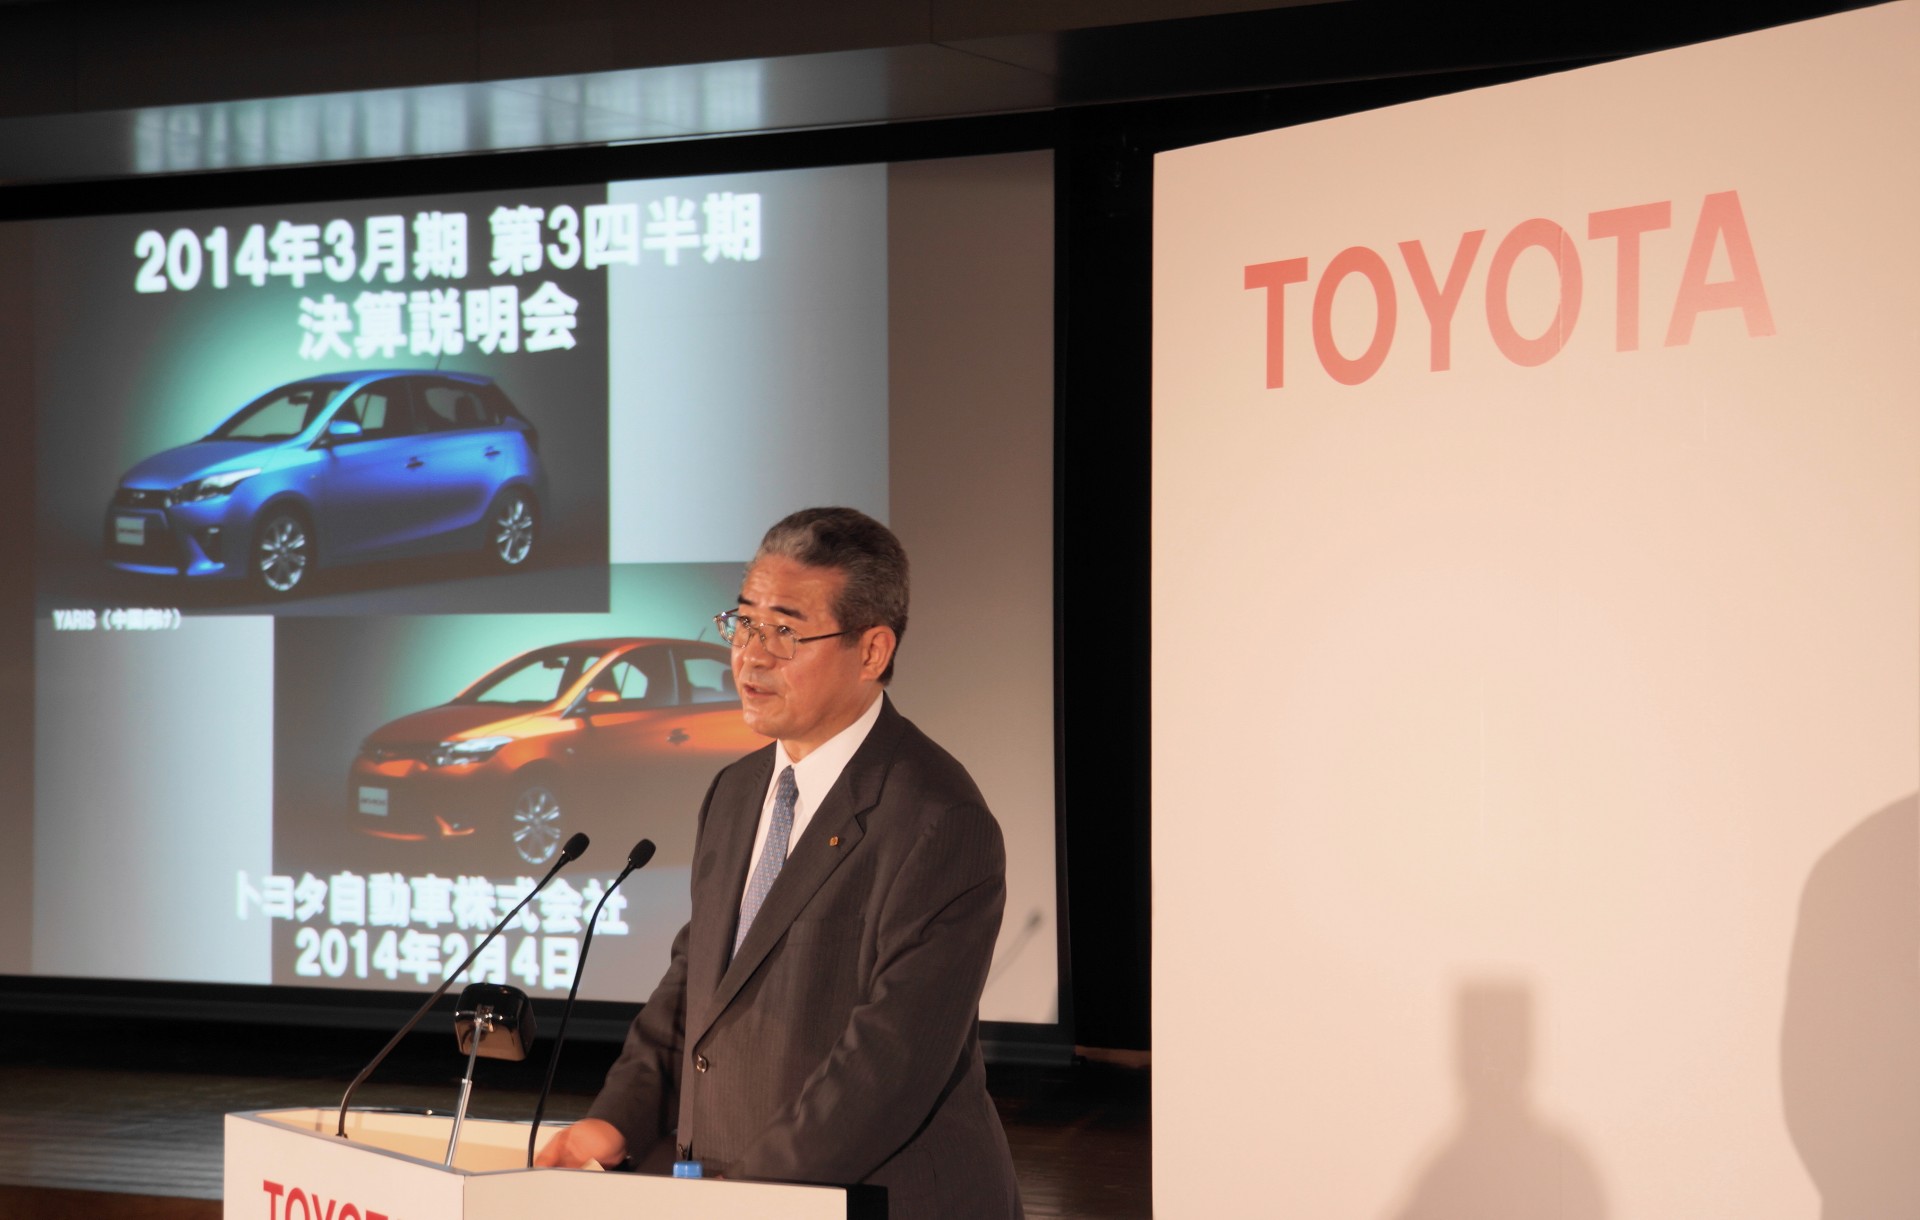 Managing Officer Takuo Sasaki speaks at FY2014 3Q Financial Results Press Conference